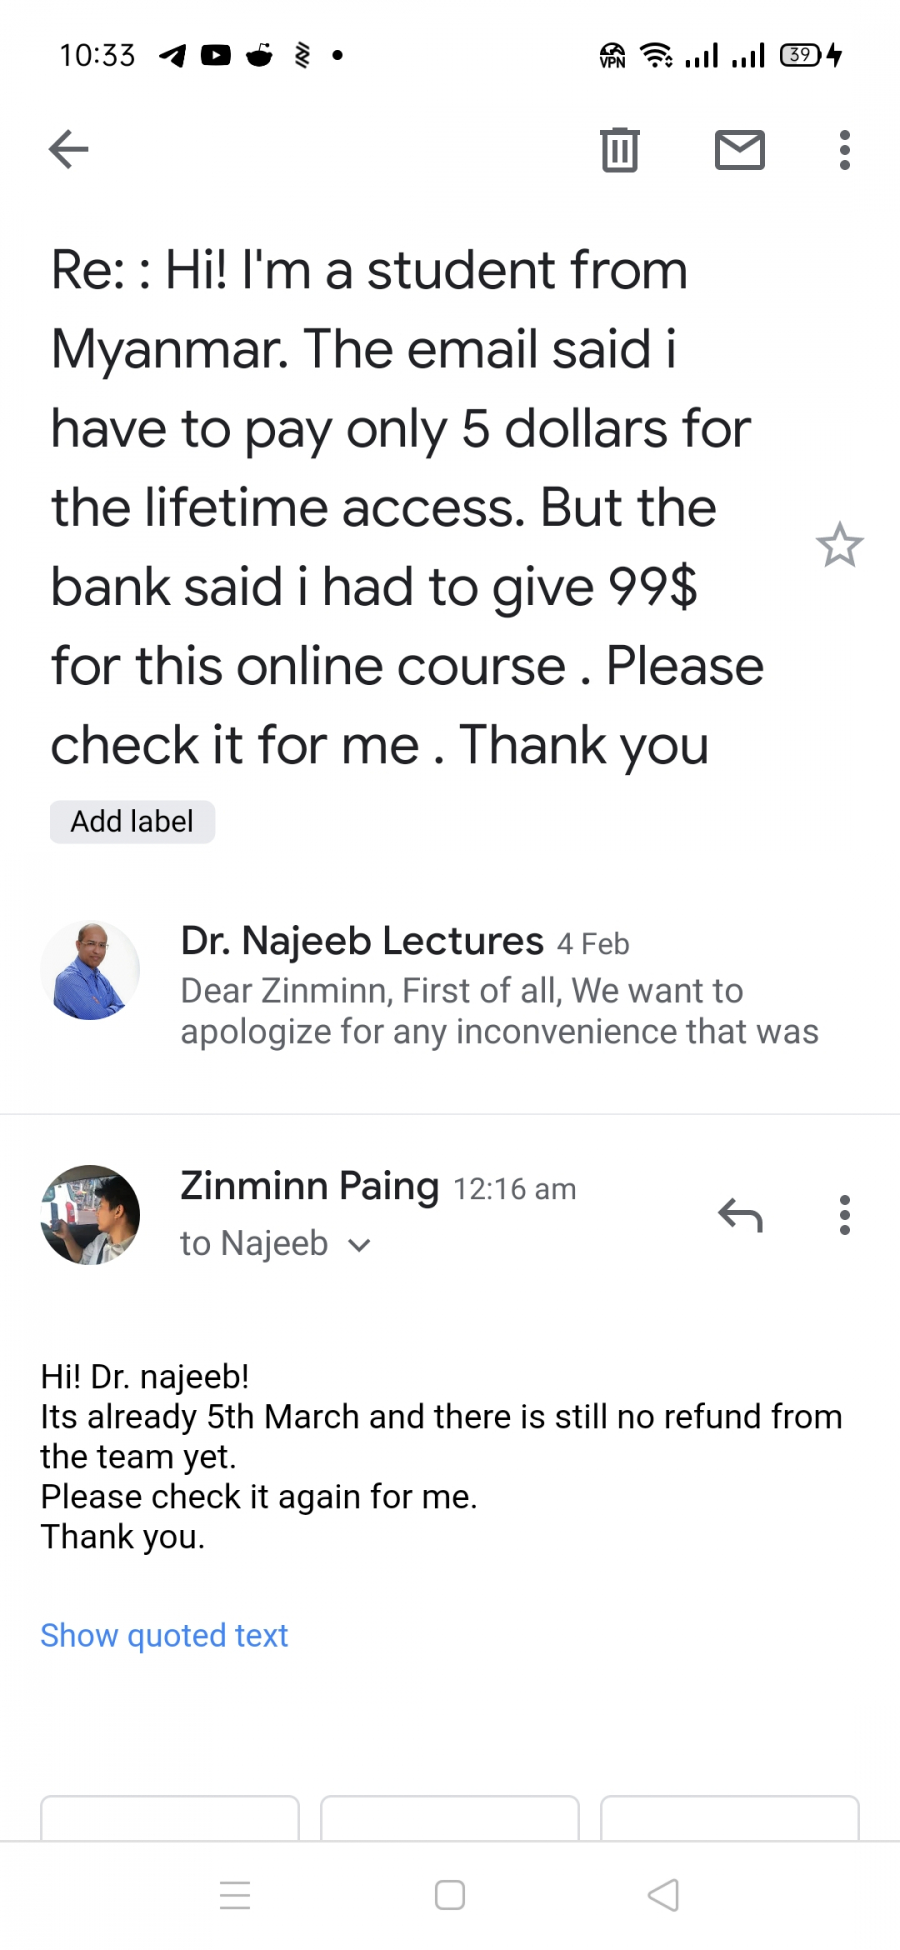 dr najeeb lectures refund